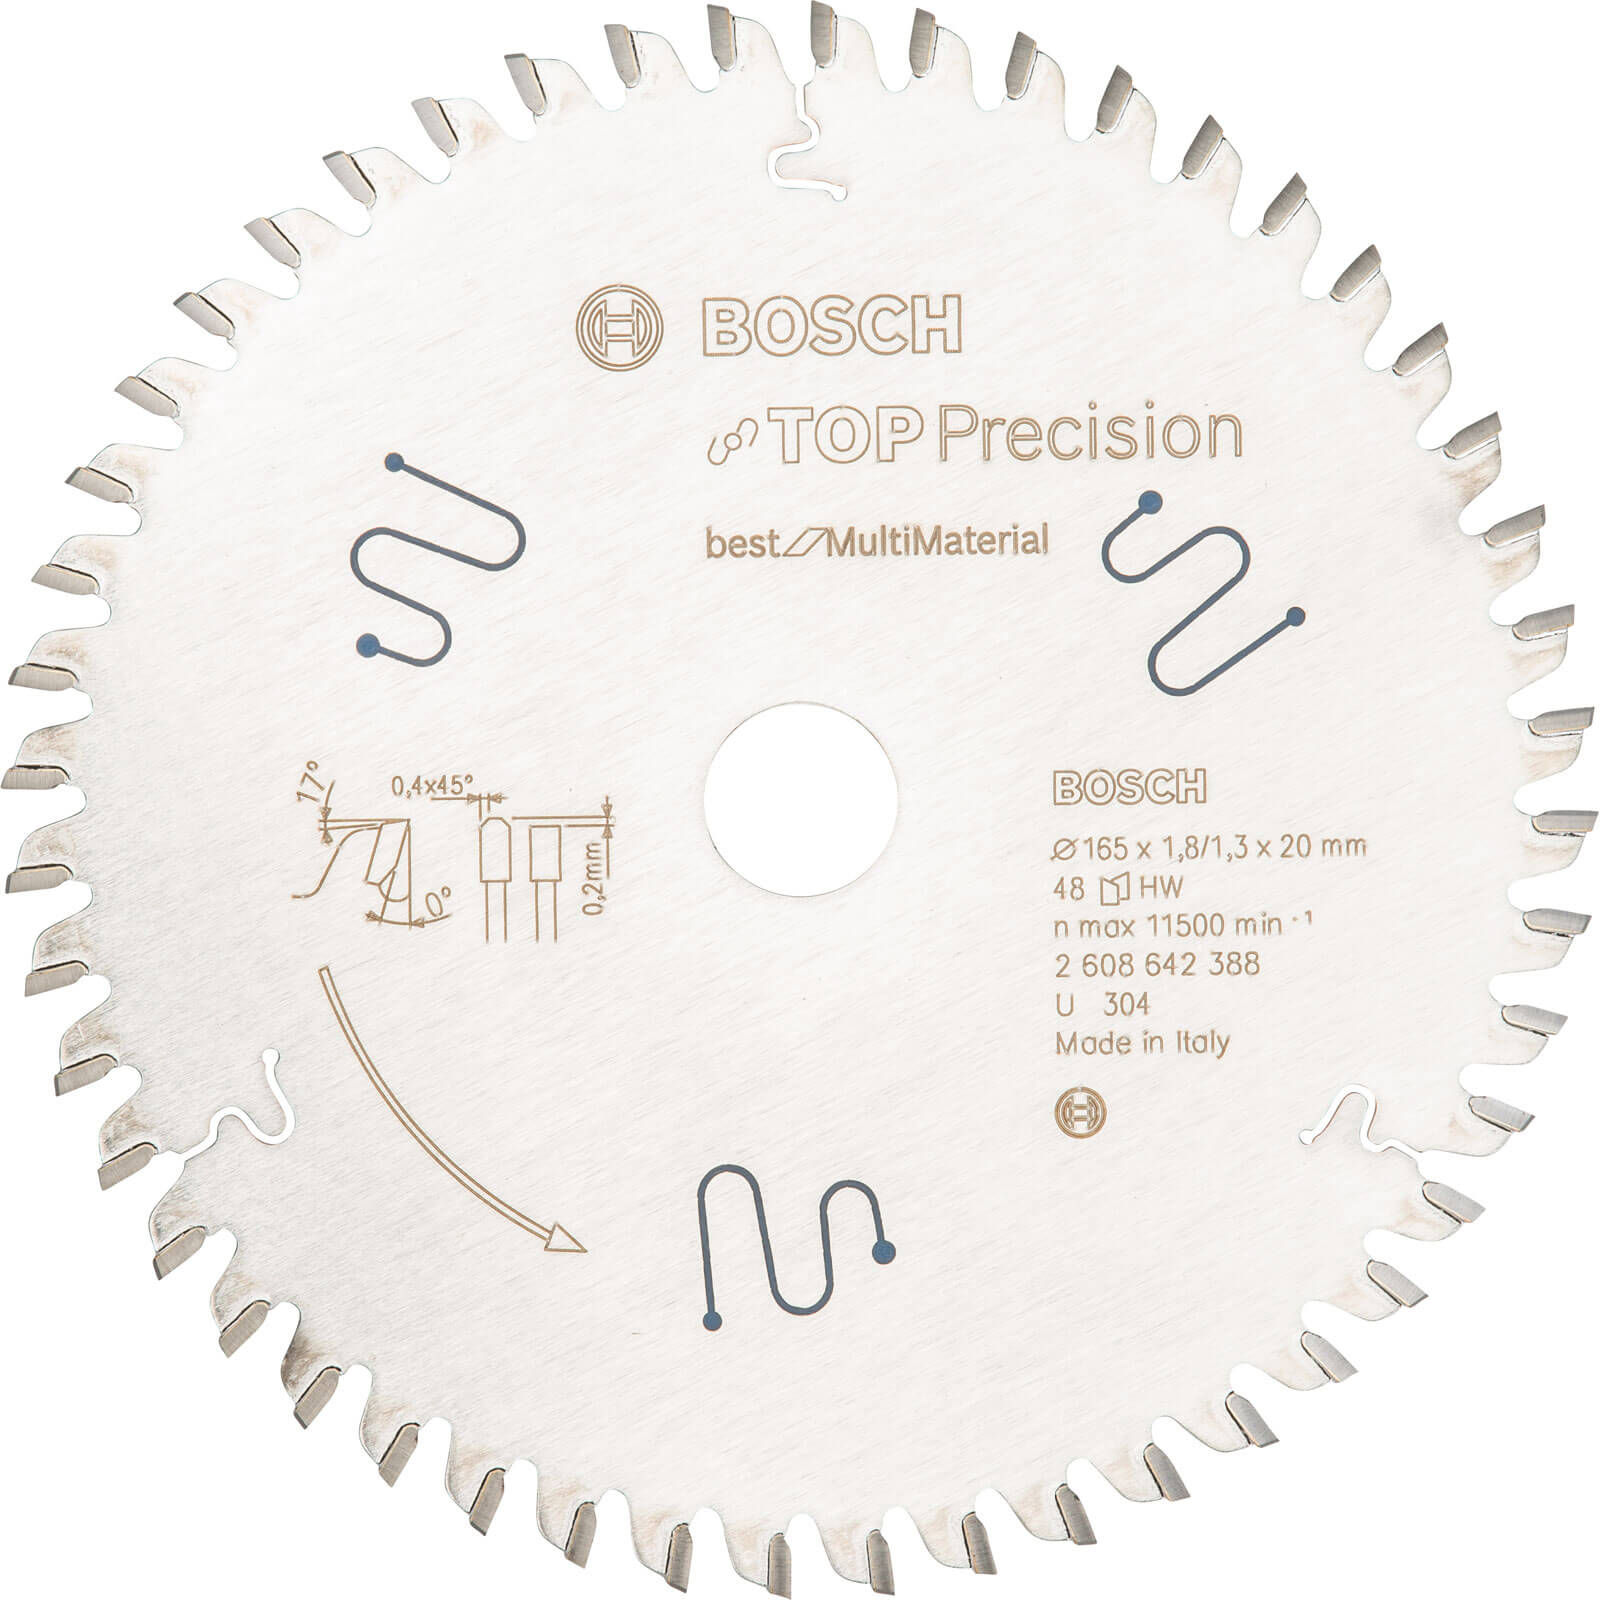 Photos - Power Tool Accessory Bosch Top Precision Multi Material Cutting Saw Blade 165mm 48T 20mm 